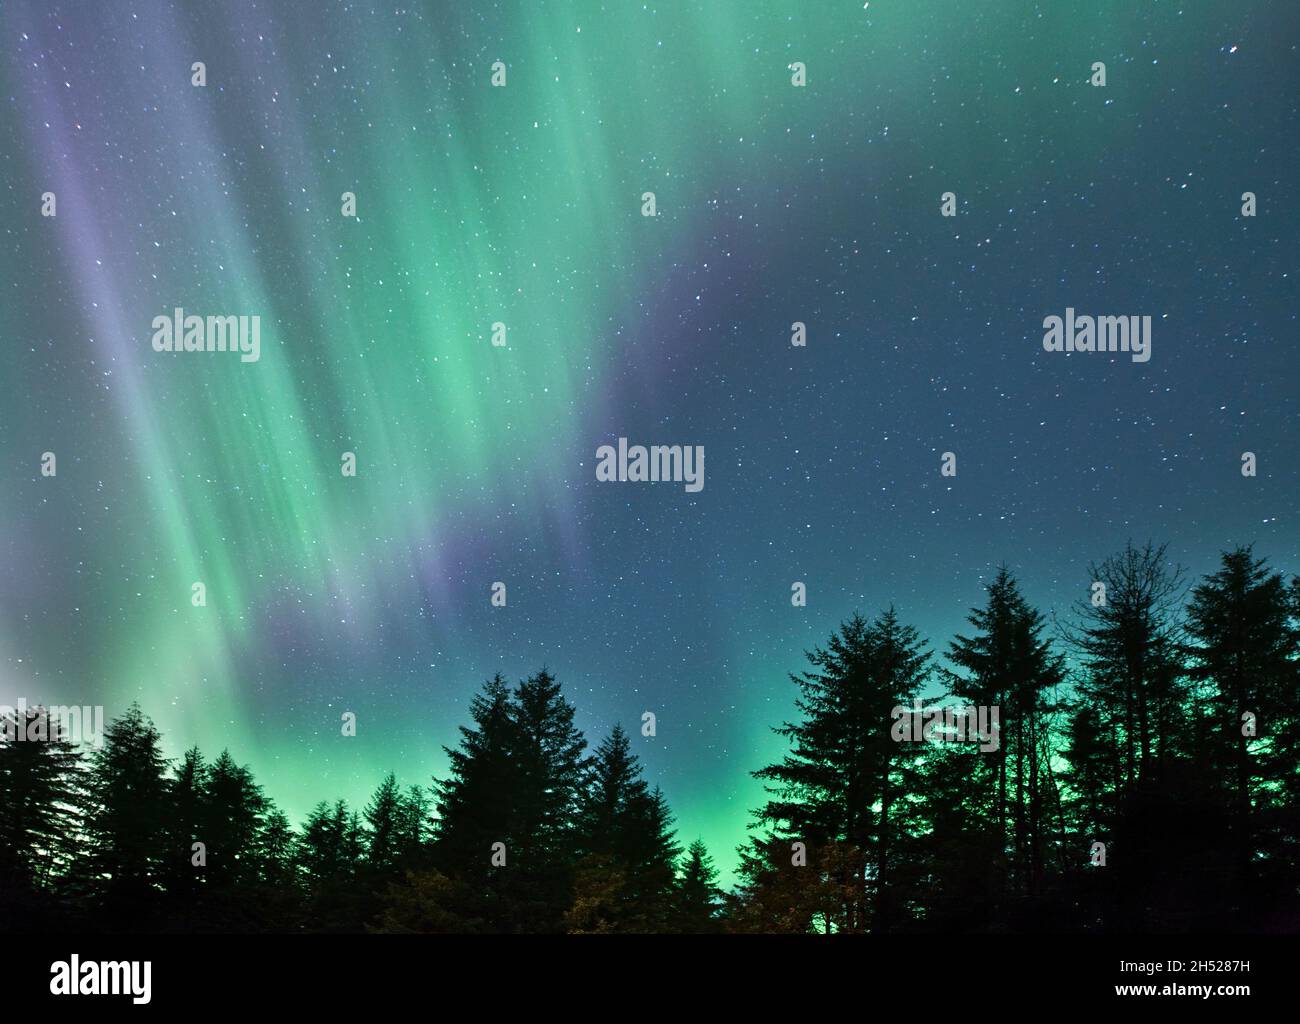 Aurora Borealis (northern lights) in purple and green in the night sky in Alaska with spruce and hemlock trees silhouetted. Stock Photo